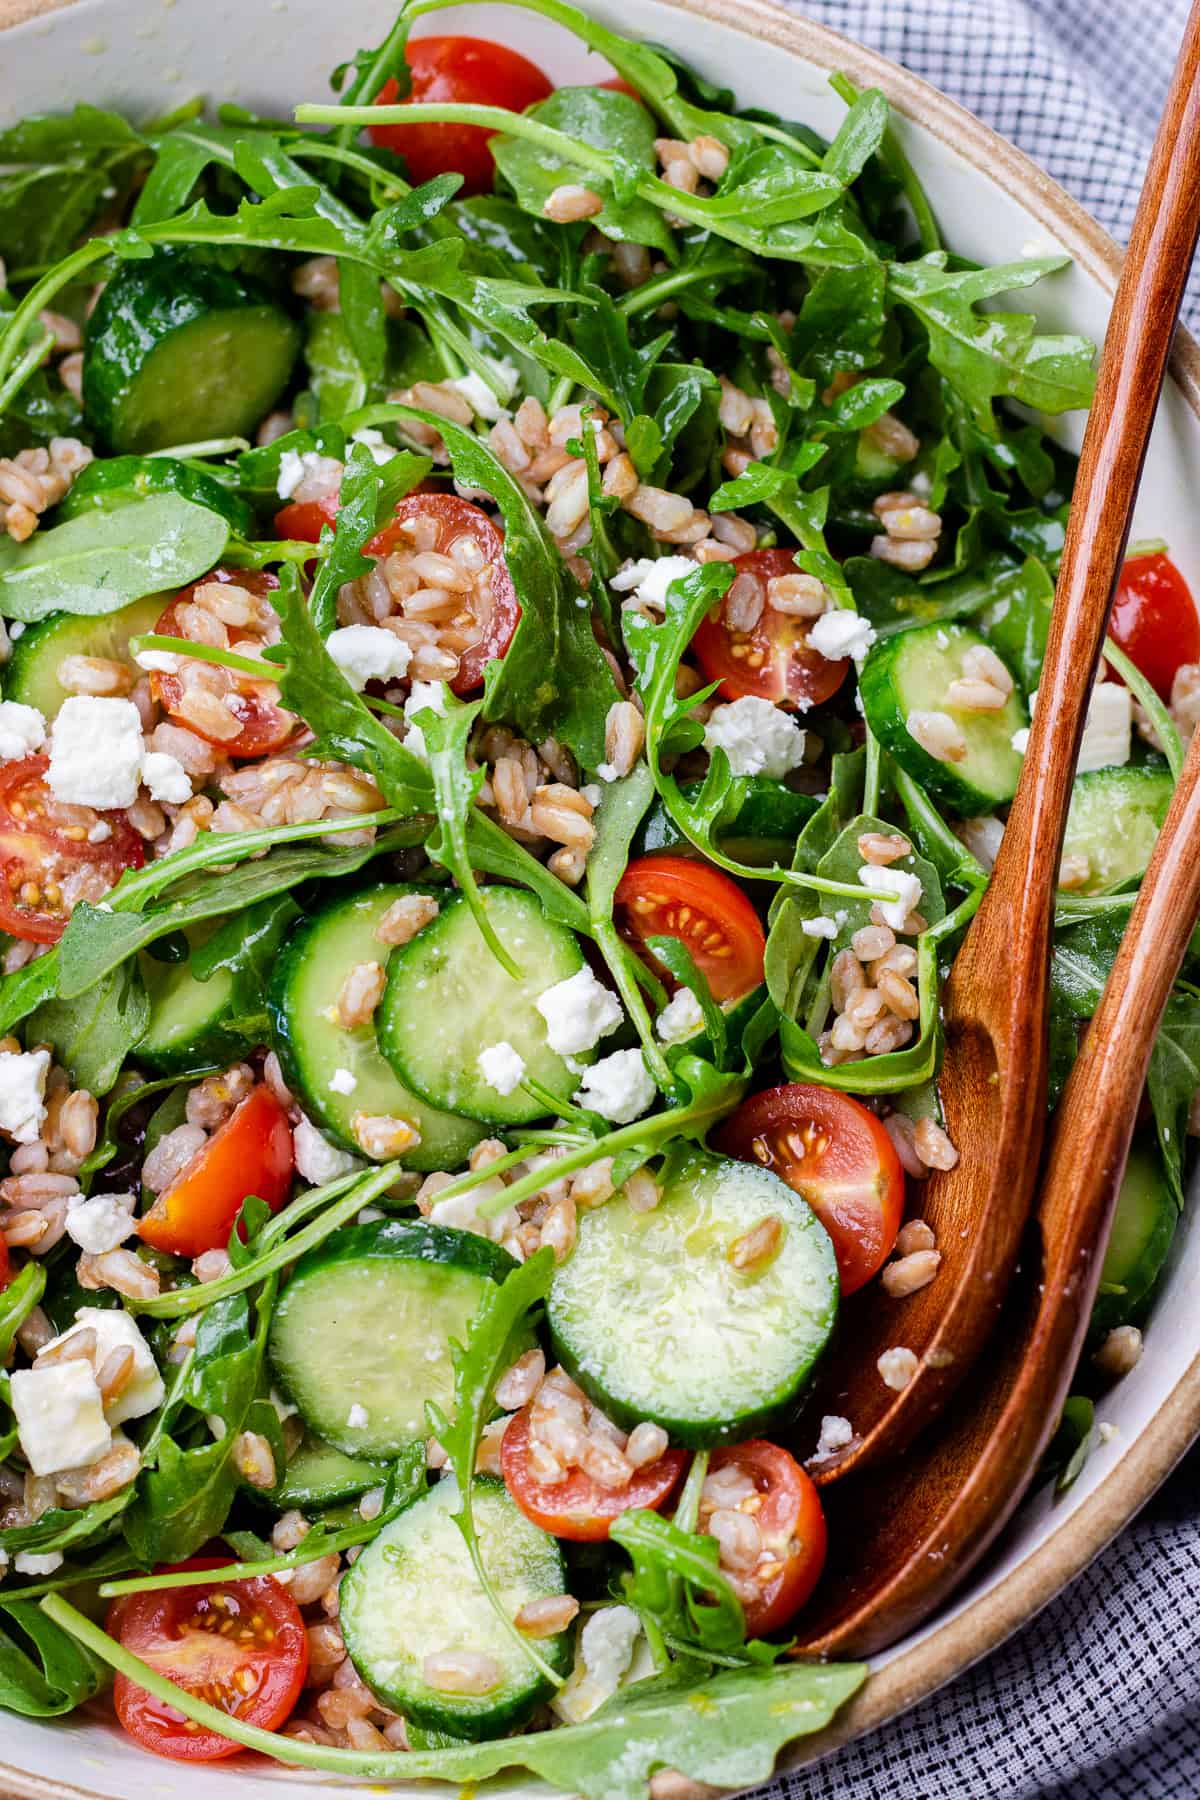 Farro salad with arugula, cucumbers, and tomatoes in a bowl.